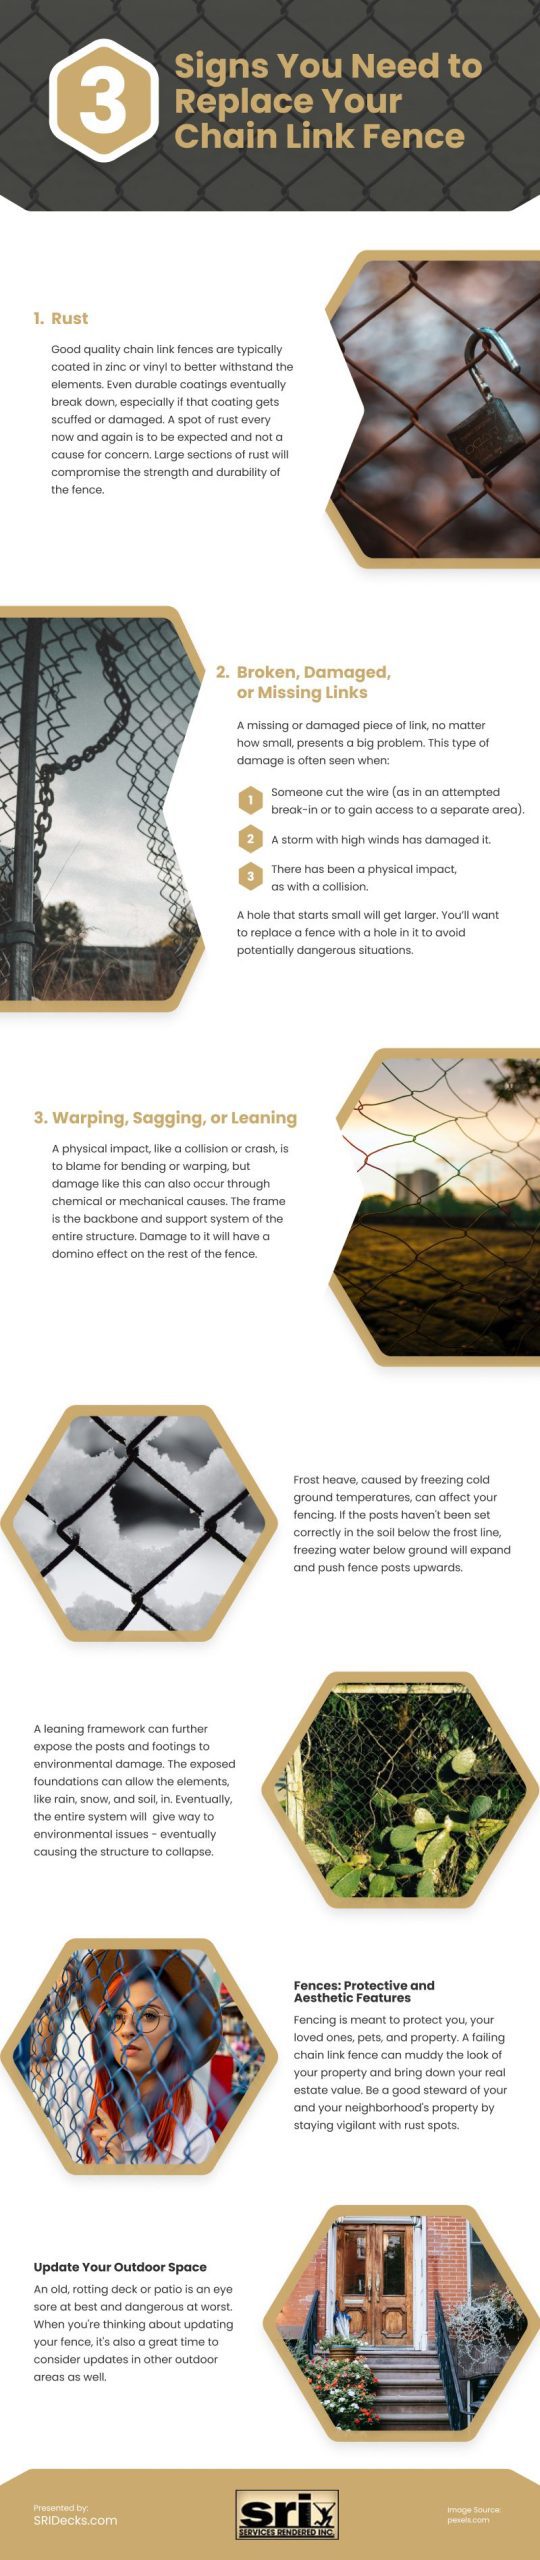 3 Signs You Need to Replace Your Chain Link Fence Infographic